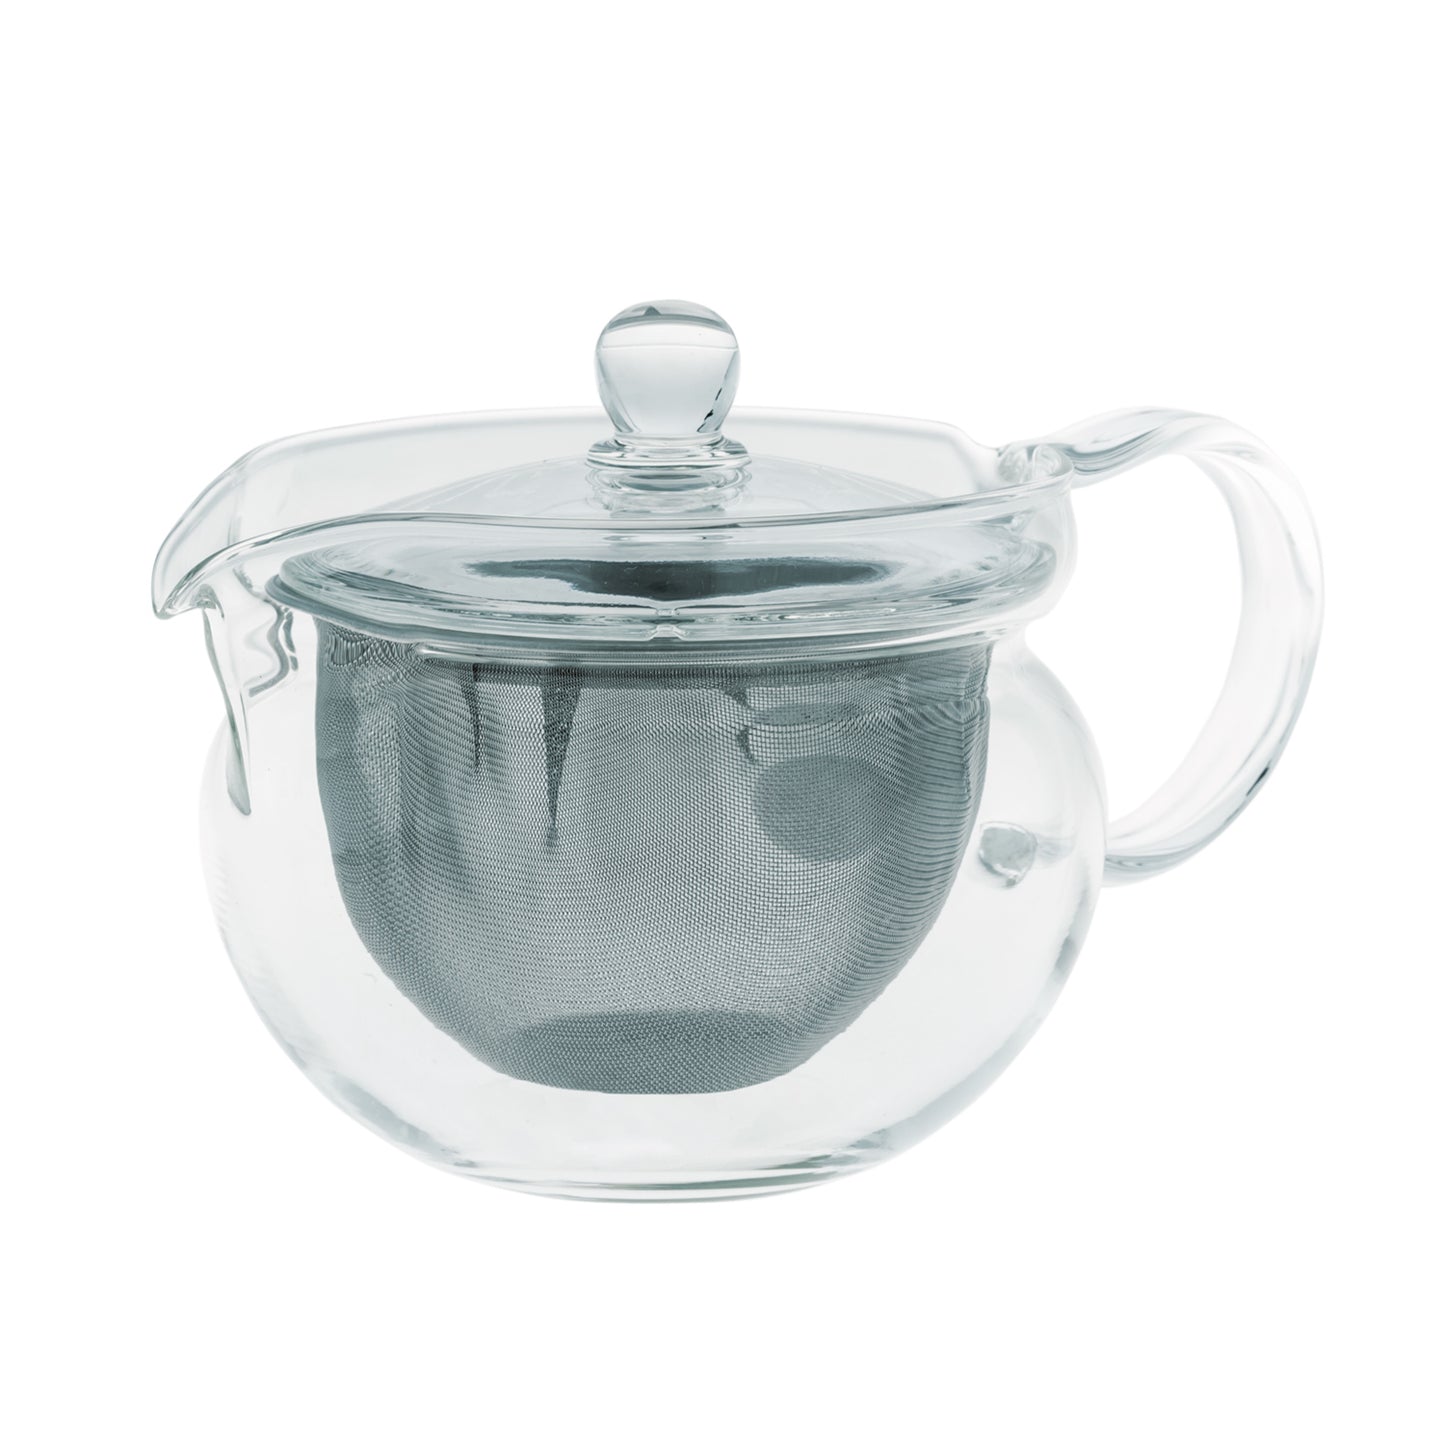 GLASS TEAPOT with filter, 300ml